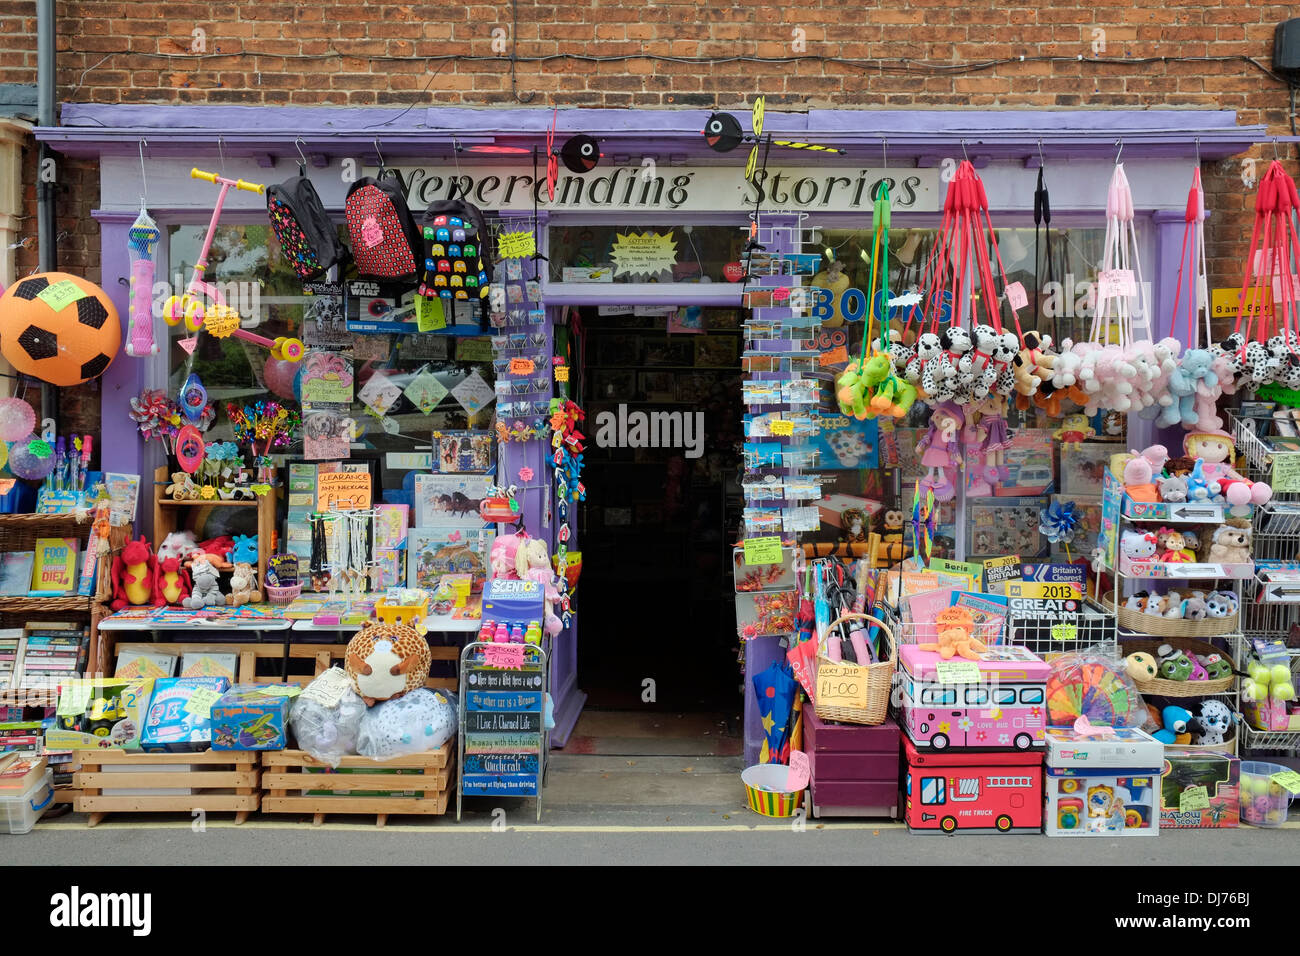 The 'Neverending Stories' seaside shop at Wells-next-the-Sea, Norfolk, England. Stock Photo